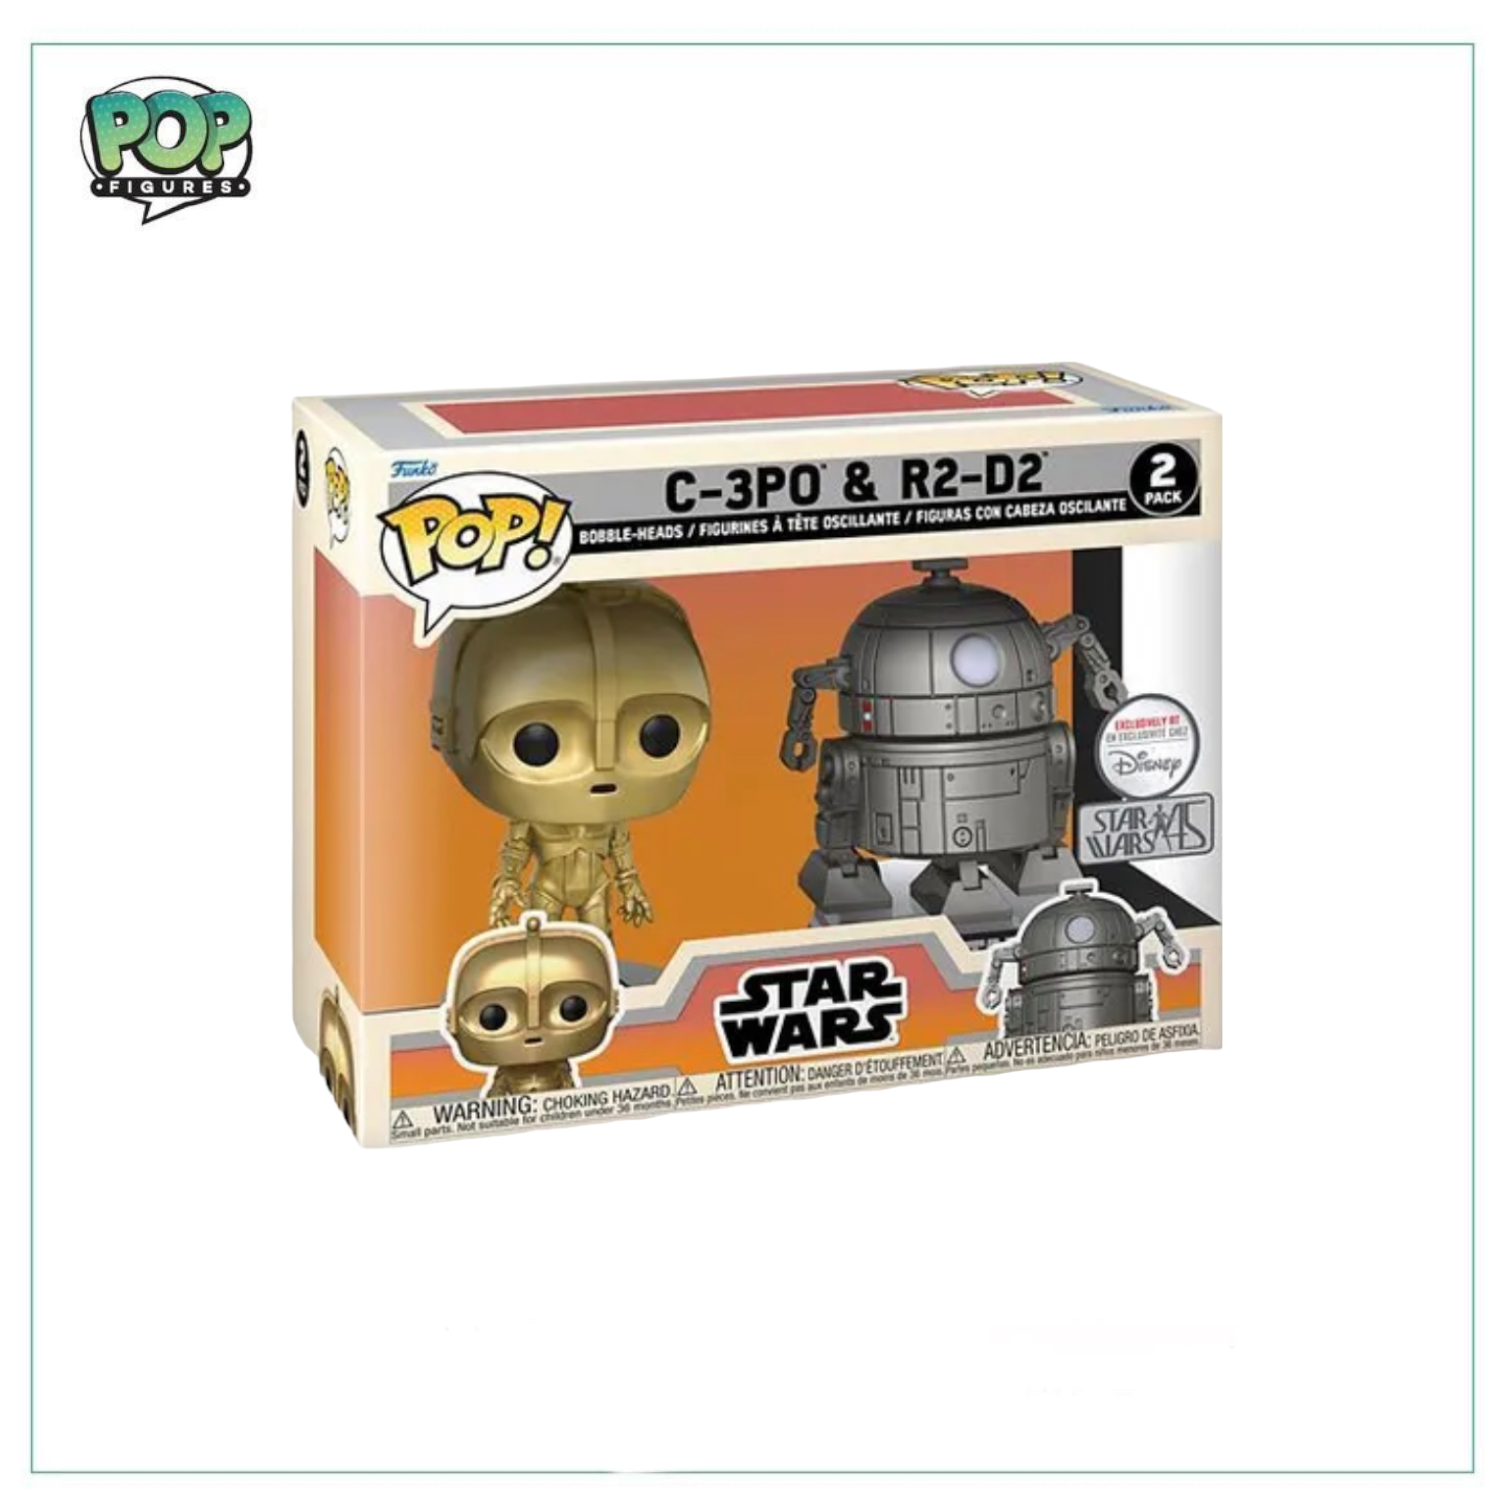 C-3PO & R2-D2 Deluxe Funko 2 Pack! Star Wars - Disney Exclusive - Angry Cat